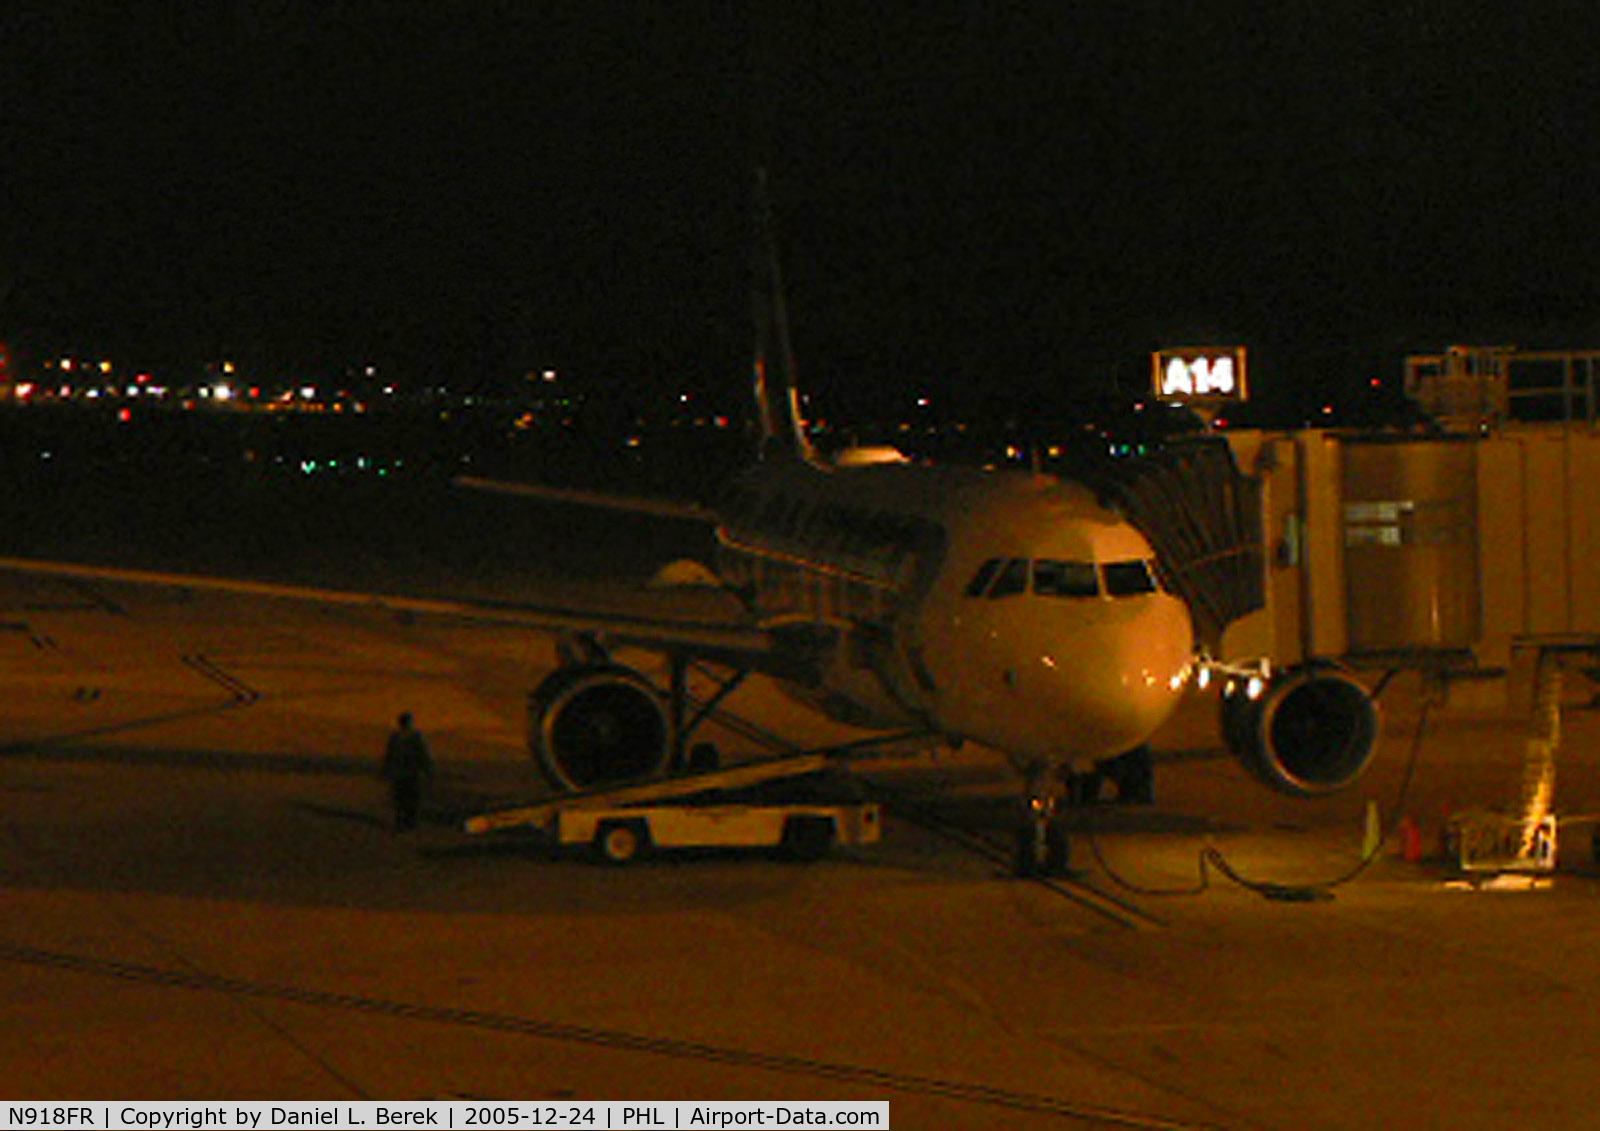 N918FR, 2003 Airbus A319-111 C/N 1943, A Frontier A319 waits in the predawn darkness for its return trip to Denver. This aircraft features the whitetail deer on its tail. Beautiful aircraft!